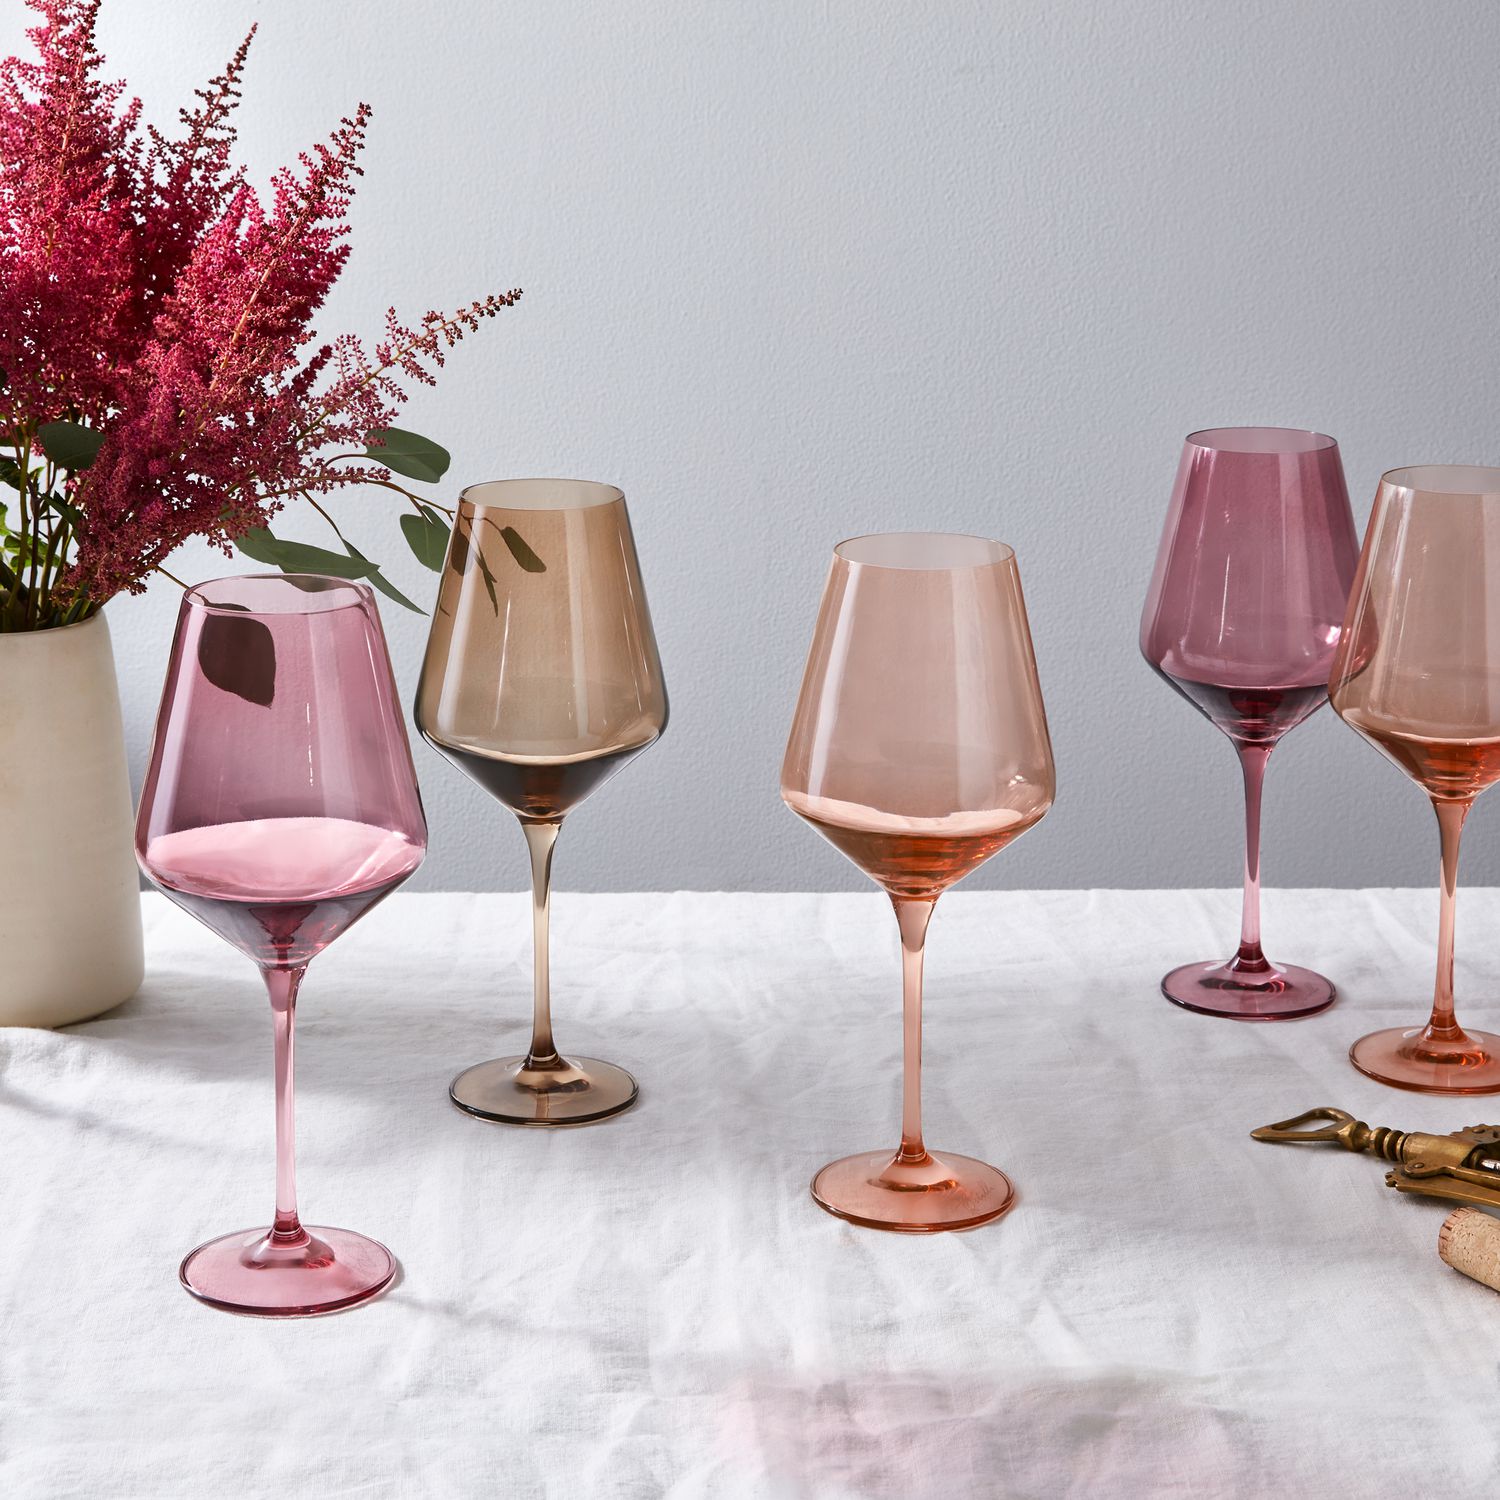 Estelle Colored Glass Colored Wine Glasses, Hand-Blown, Set of 6 on Food52